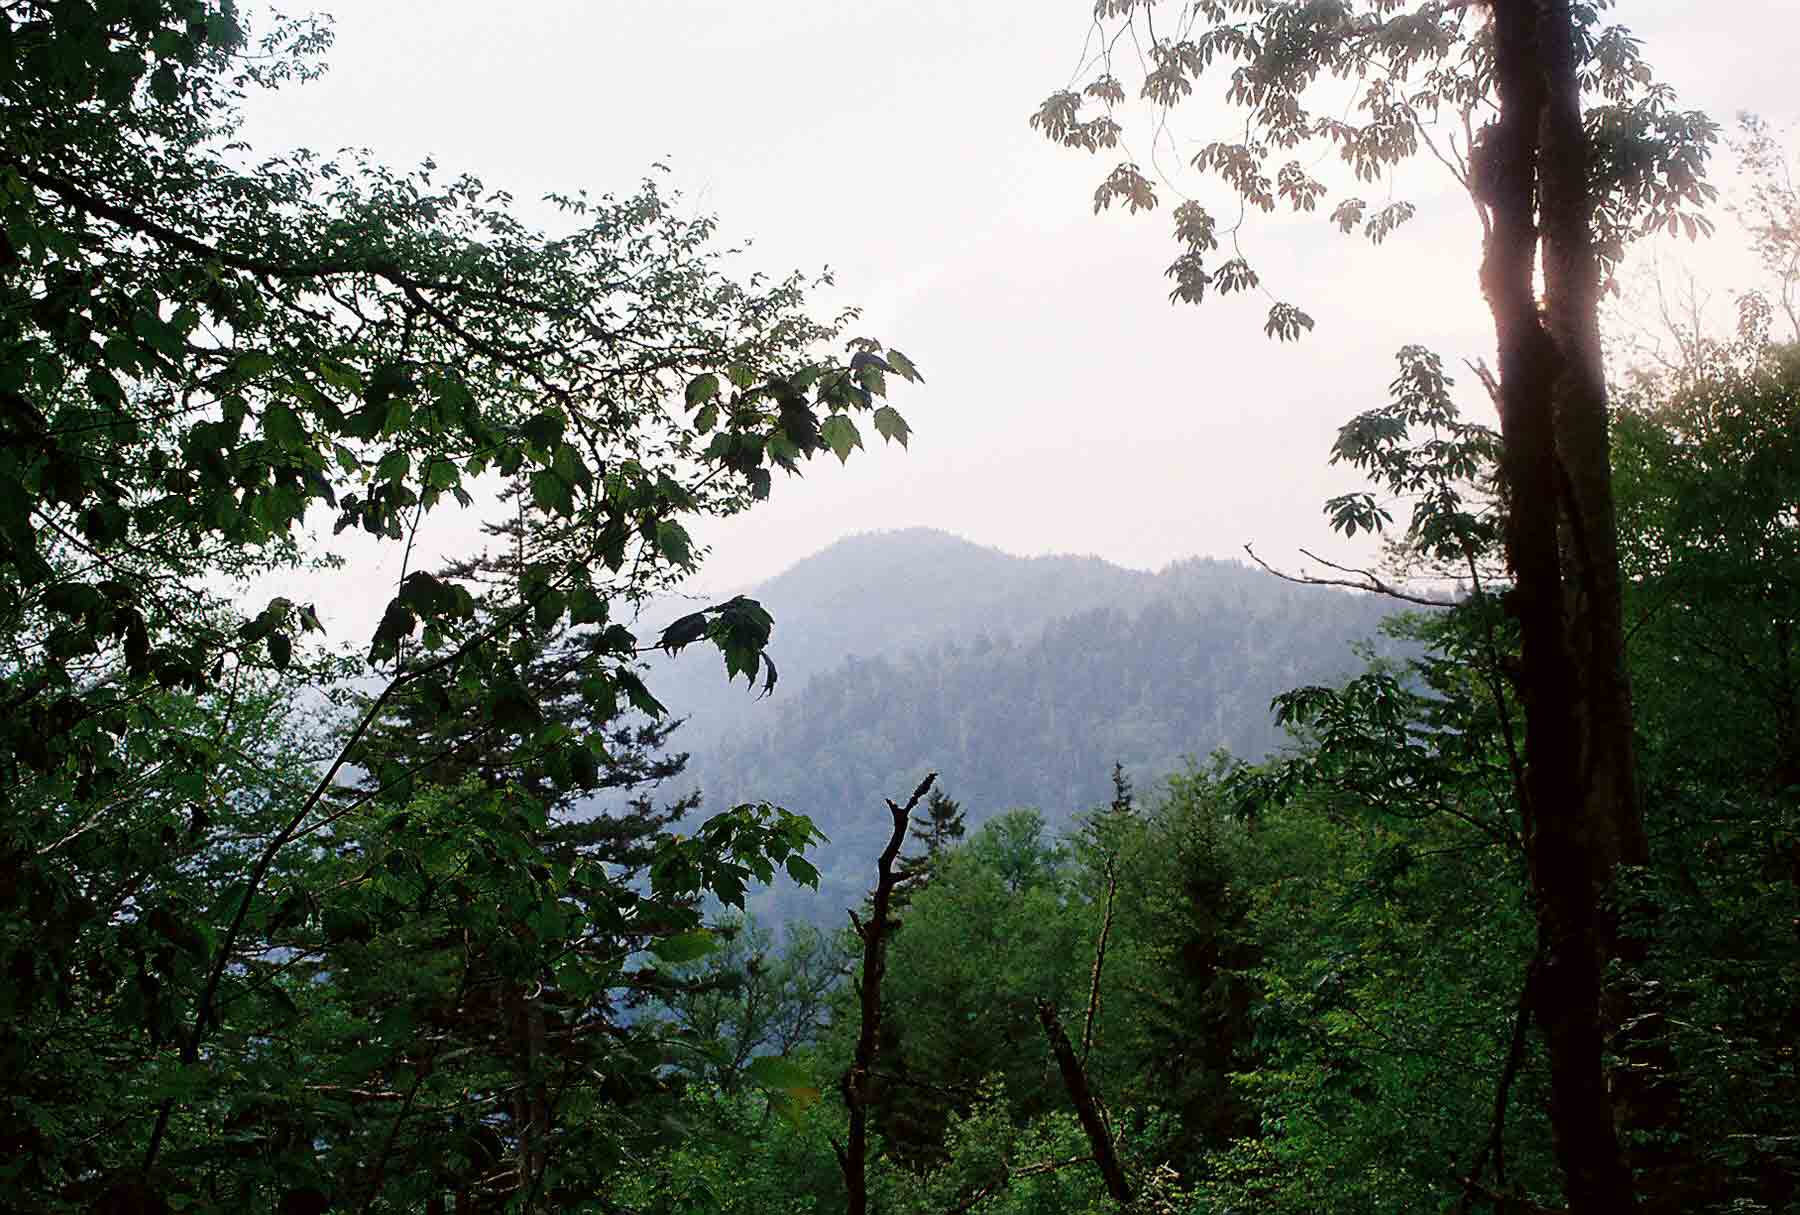 View of Mt. Le Conte from trail north of Clingmans Dome.  Courtesy dlcul@conncoll.edu